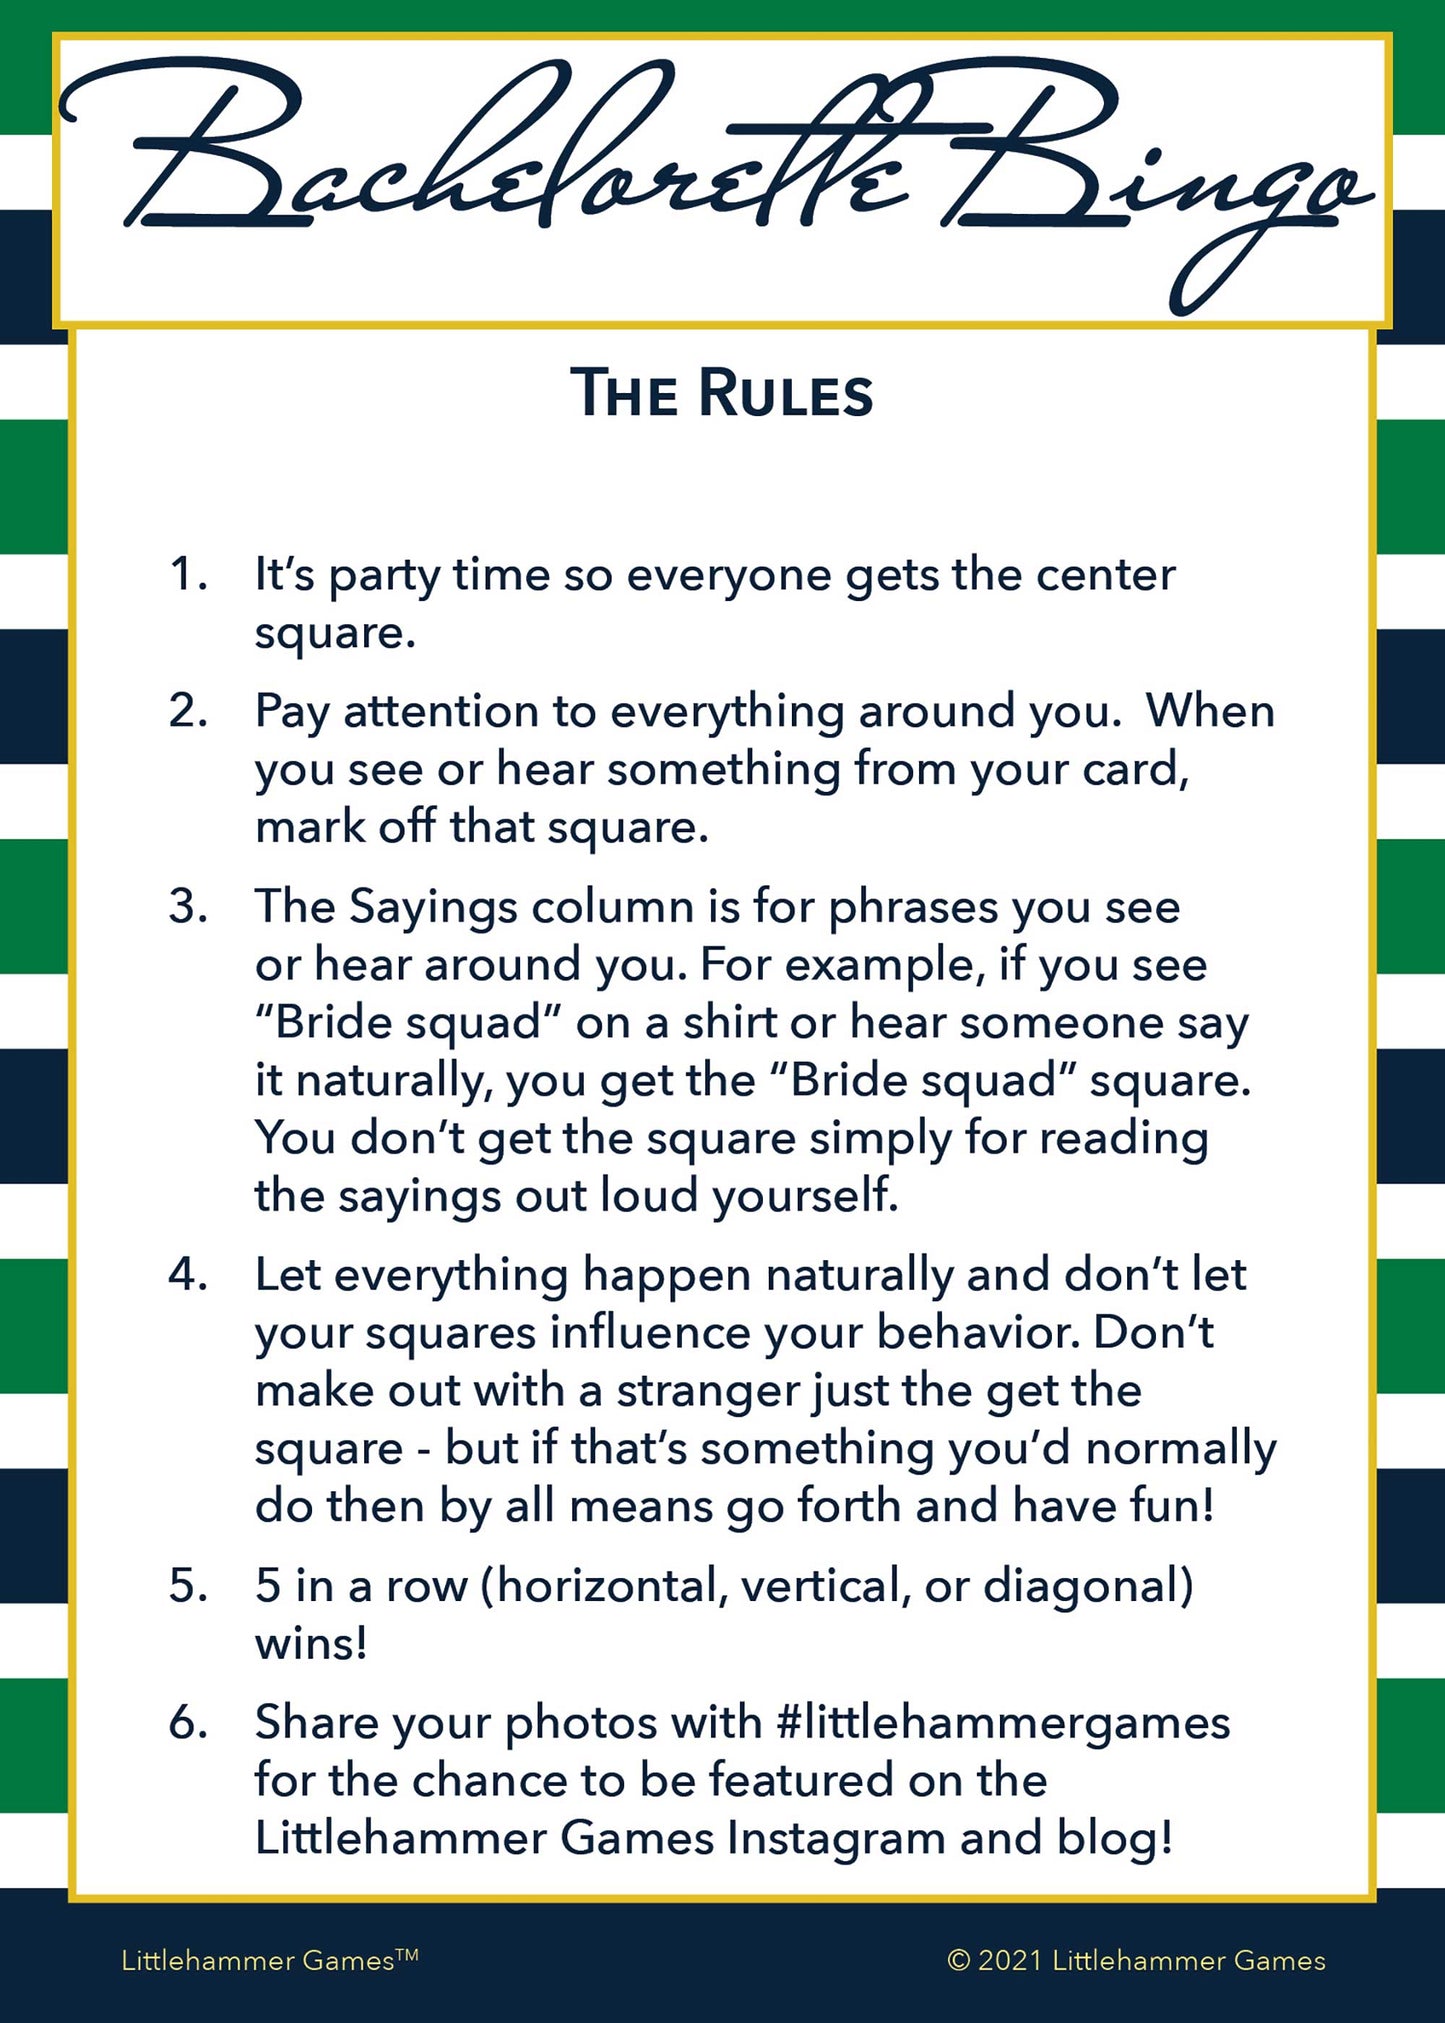 Bachelorette Bingo rules card with a green and navy-striped background